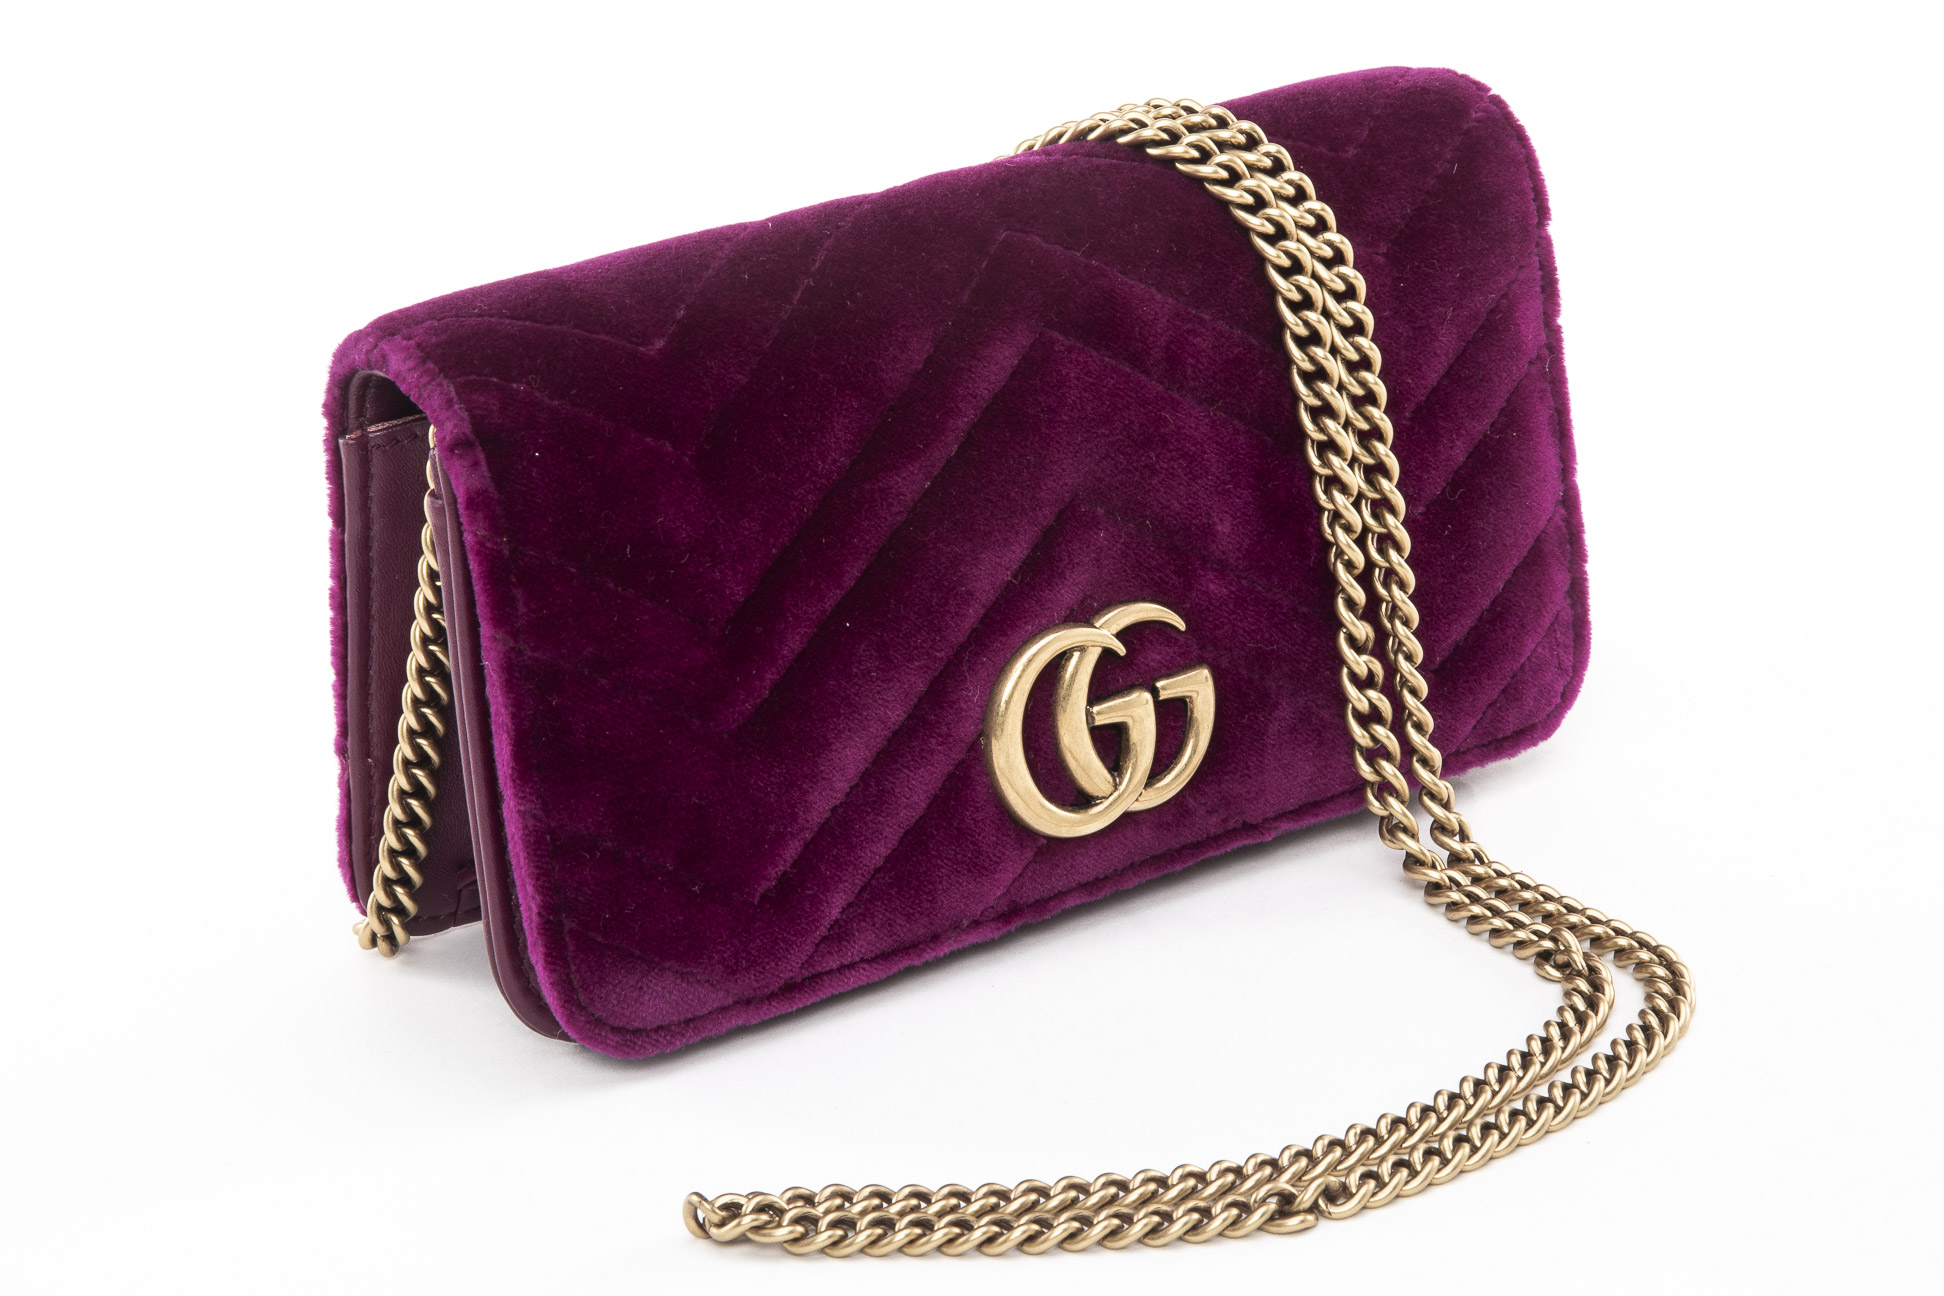 A GUCCI 'MARMONT' MAGENTA VELVET FLAP - Image 5 of 6